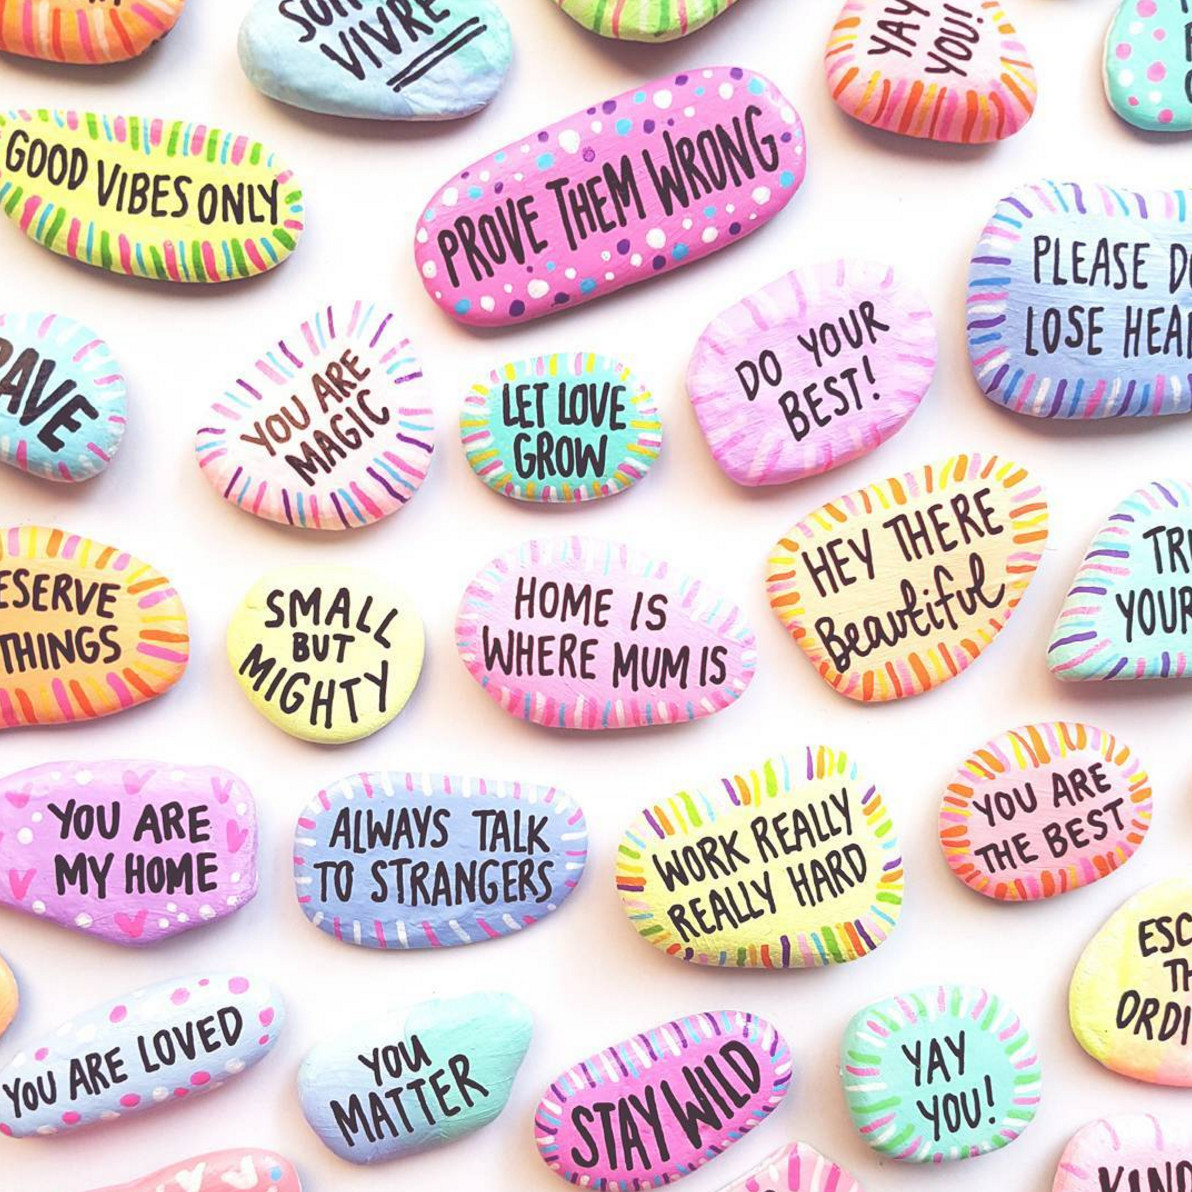 Kindness Rocks Quotes
 Let s Chat Papered Thoughts